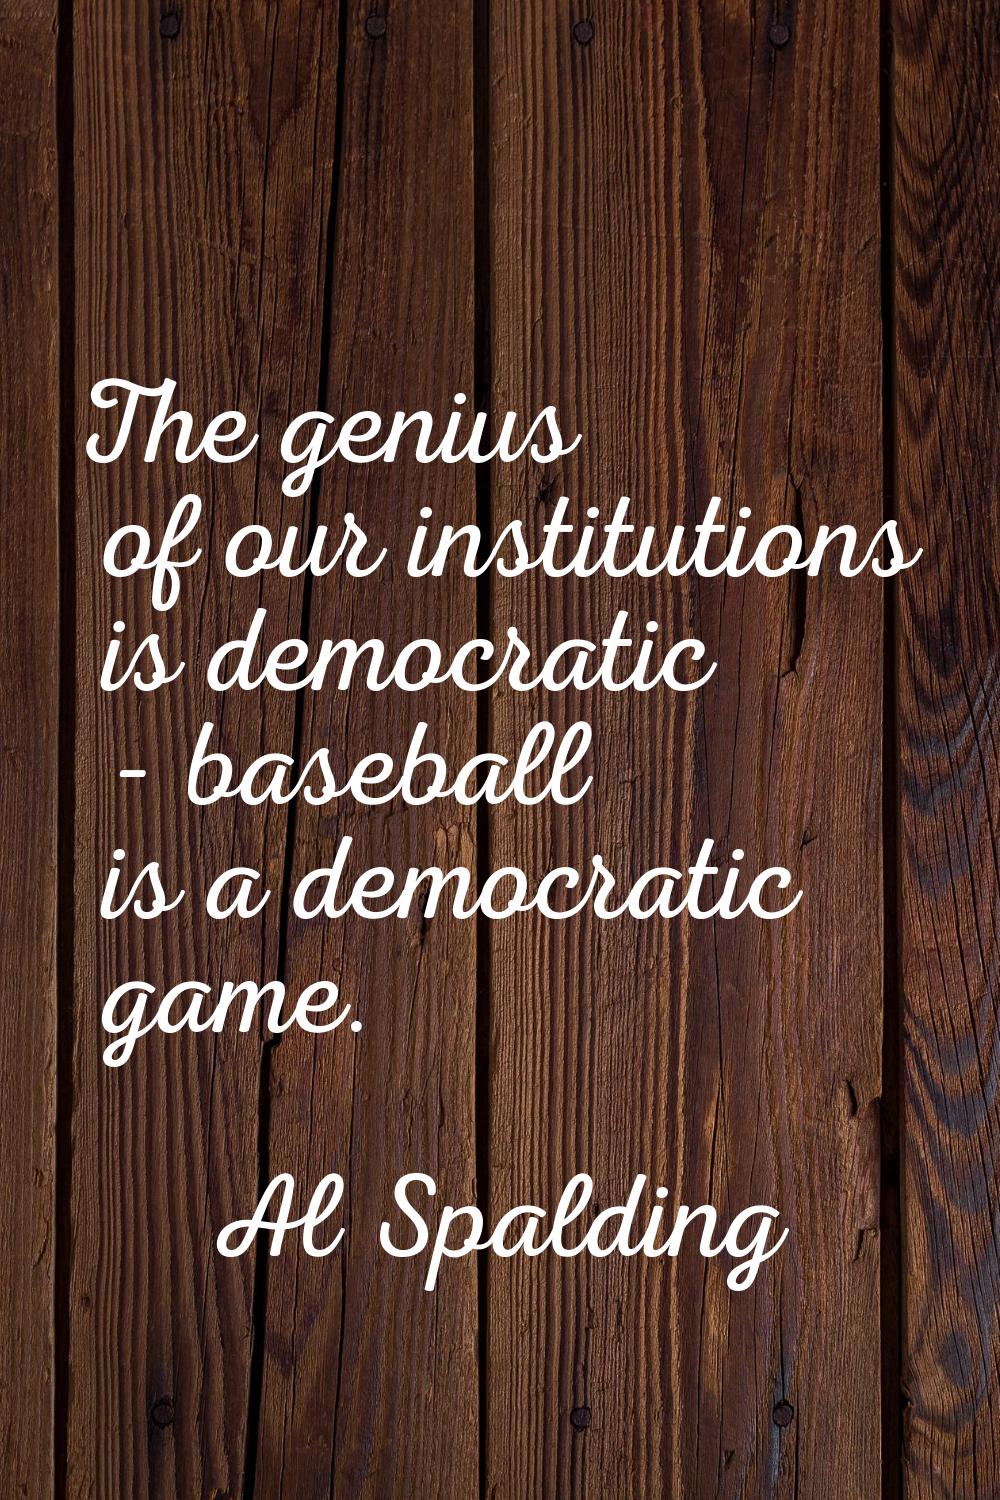 The genius of our institutions is democratic - baseball is a democratic game.